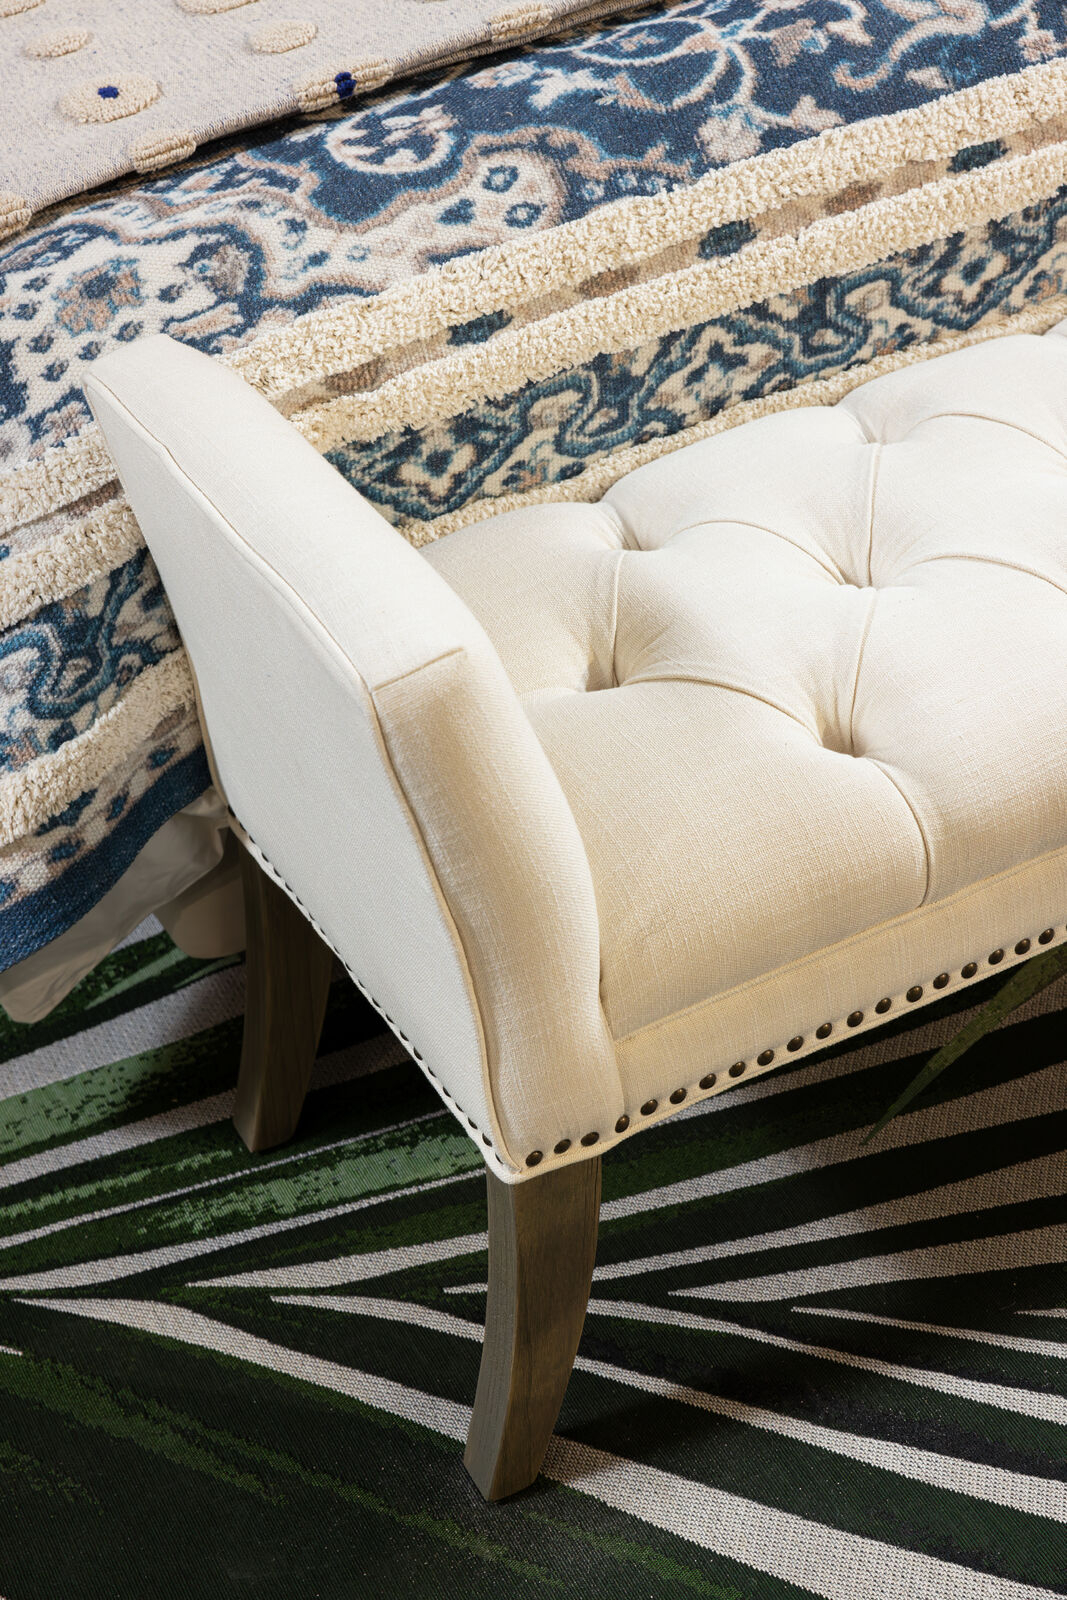 Allegra Bedend with high armrests in white fabric and wooden out-turned legs Château Collection 